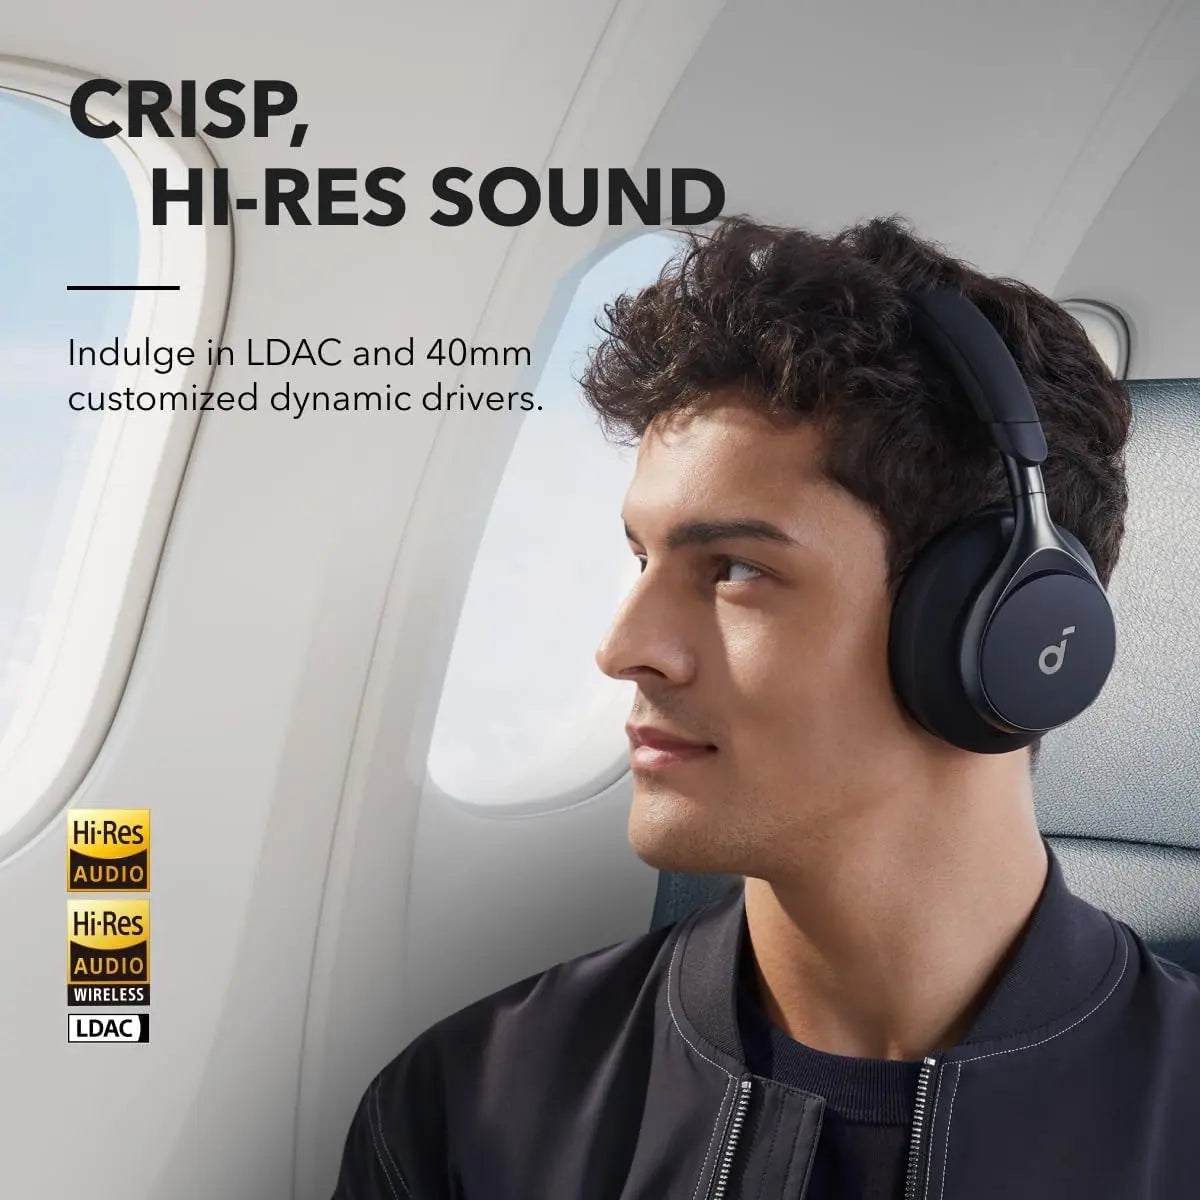 Soundcore Space One Bluetooth Headphones A3035 - Anker Singapore